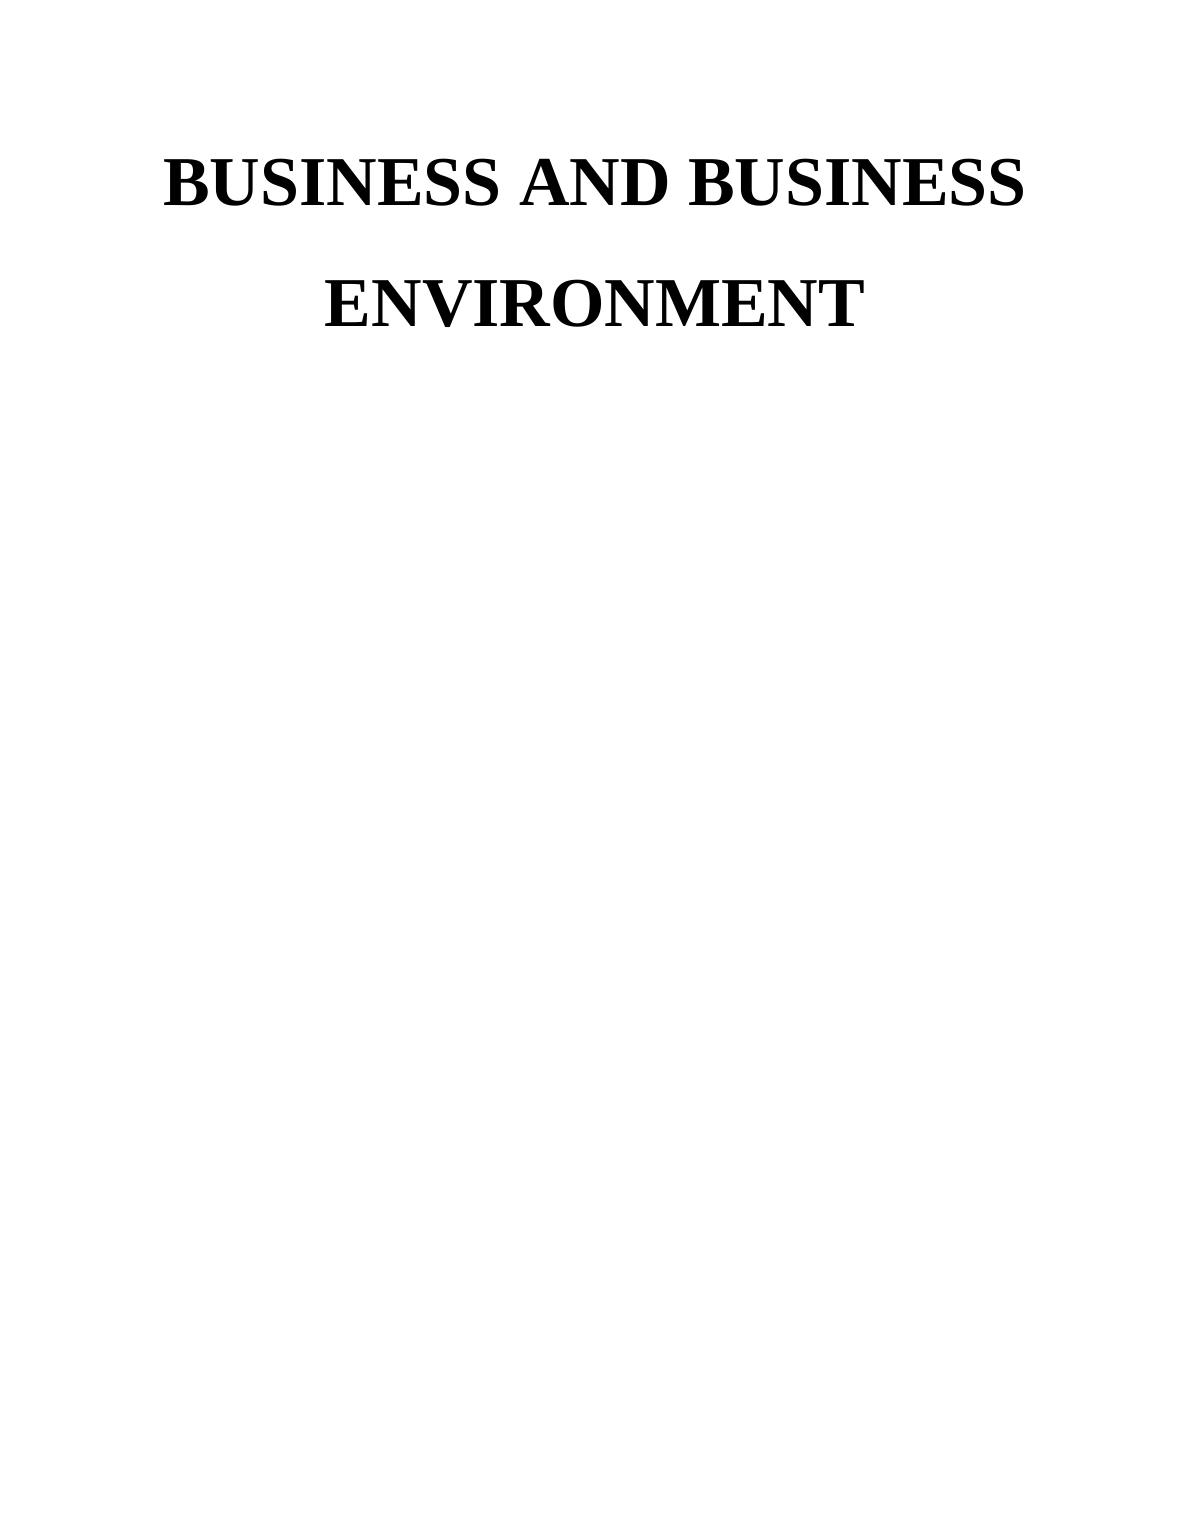 Business and Business Environment Assignment - Tesco company_1